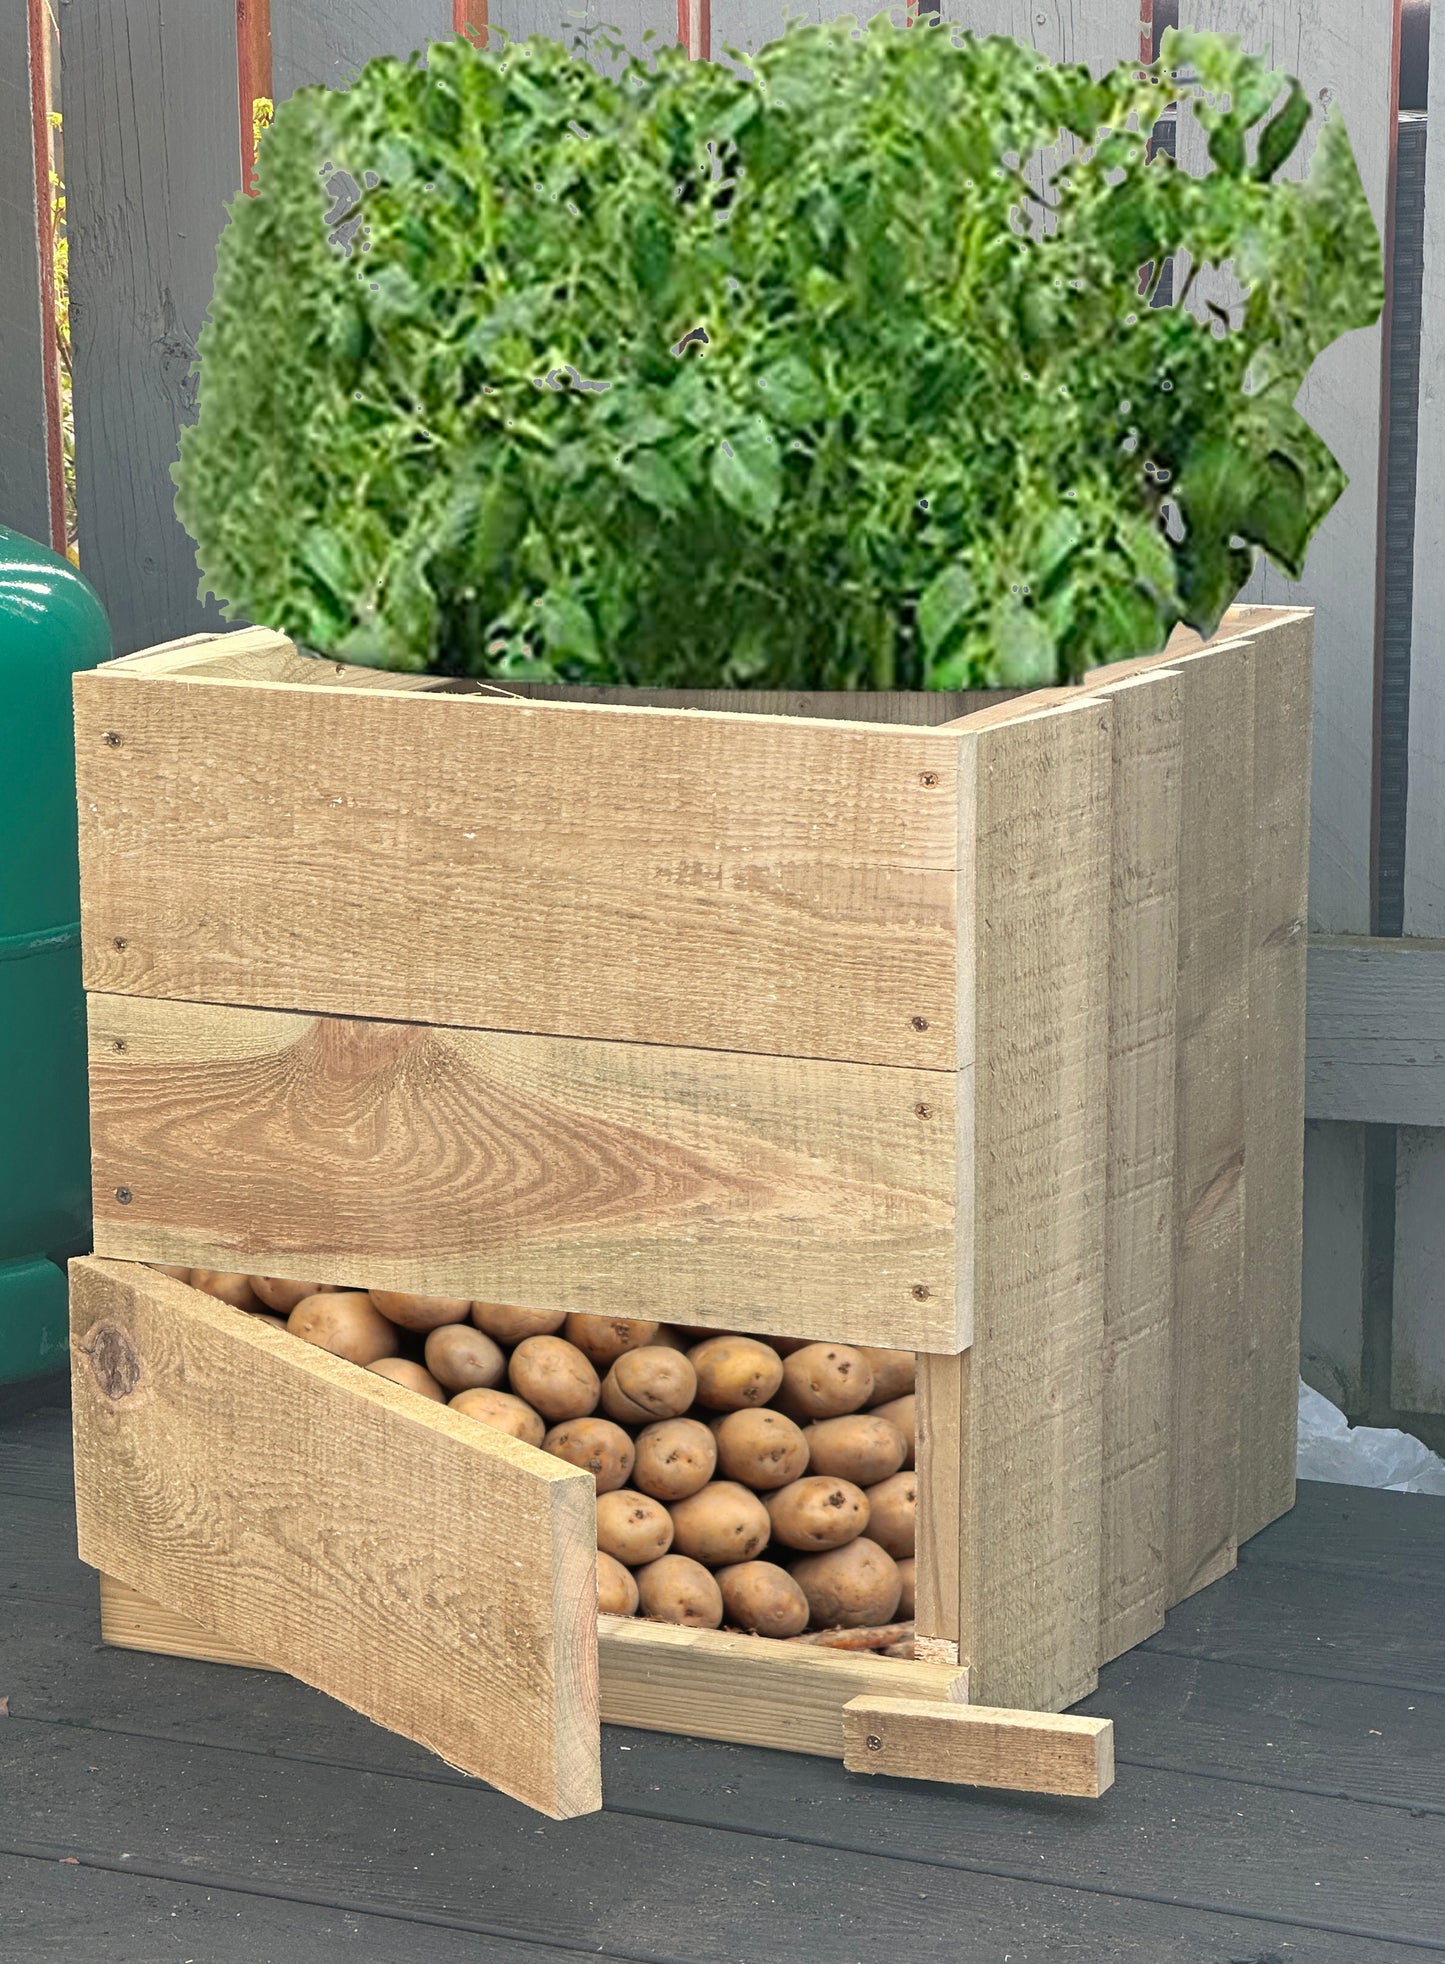 Potato Planters, grow lots of potato's in a small space with this lovely wooden planter, wooden potato planter,